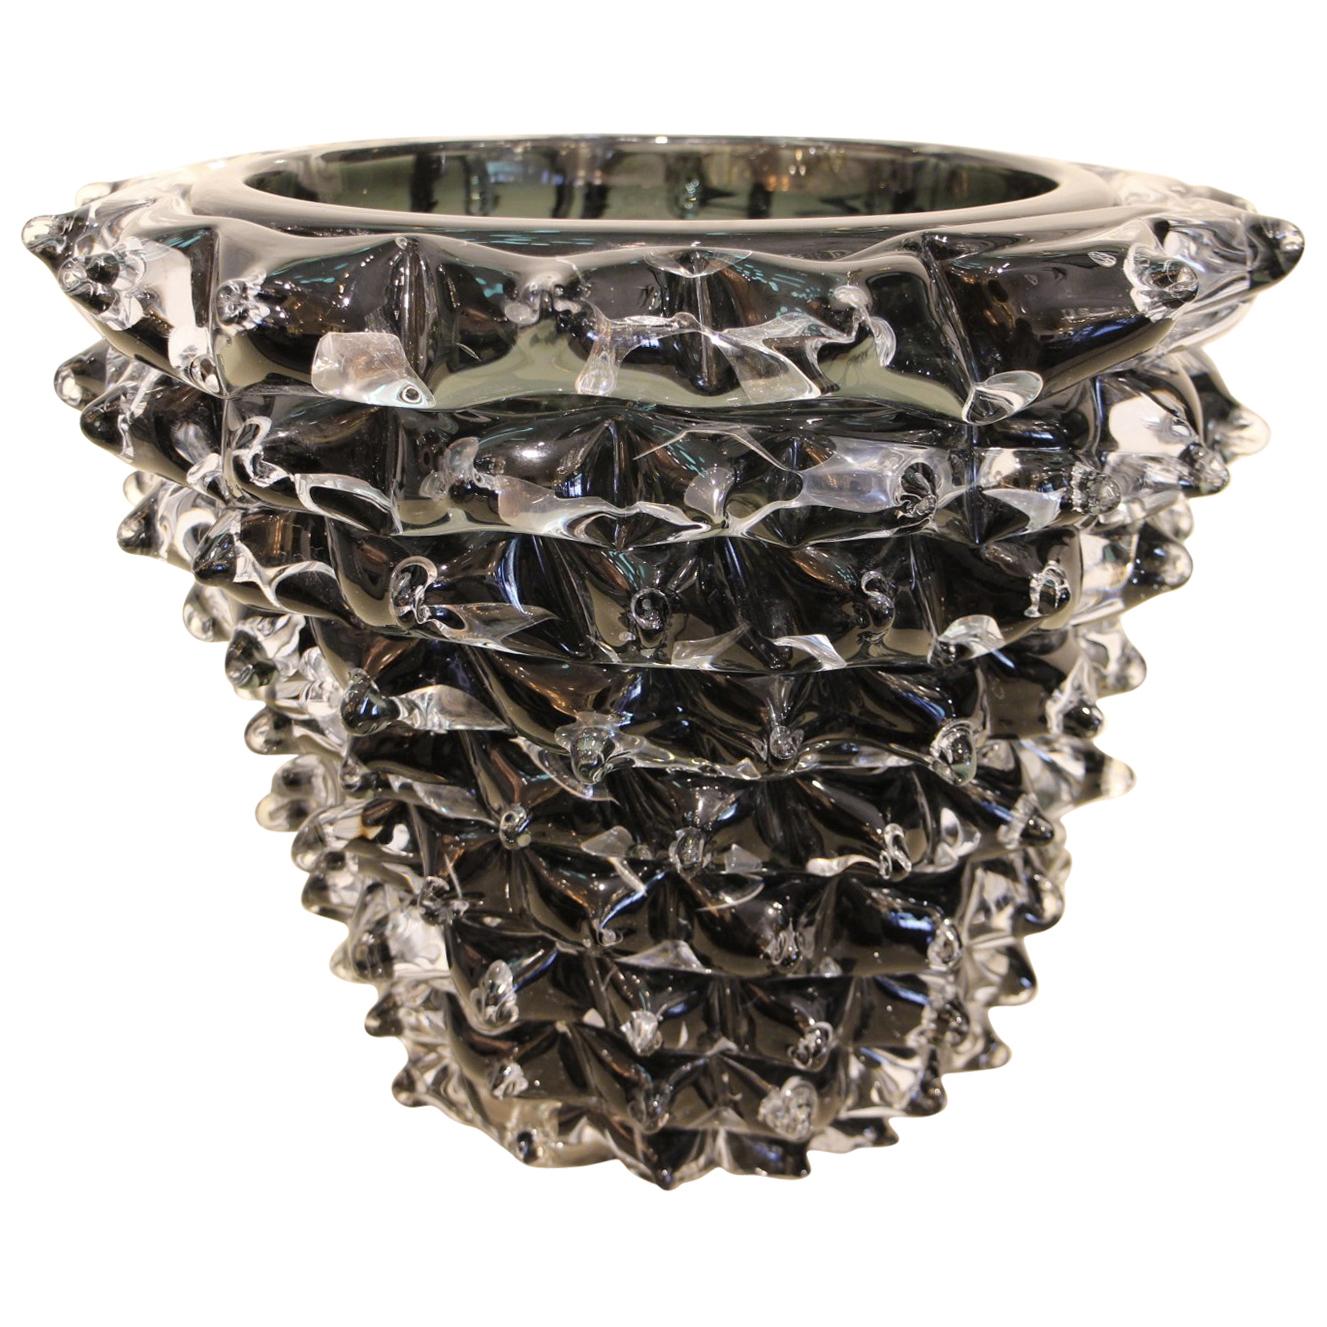 Black Vase in Murano Glass with Spikes Decor, Barovier Style, Rostrato